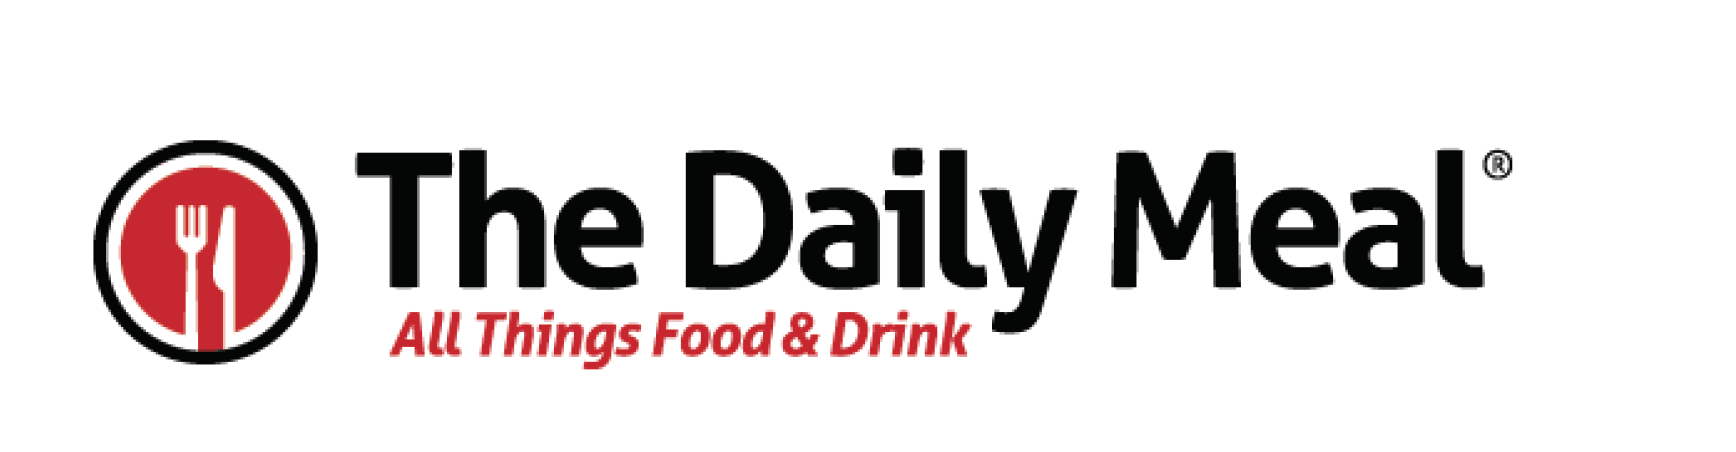 Daily Meal logo